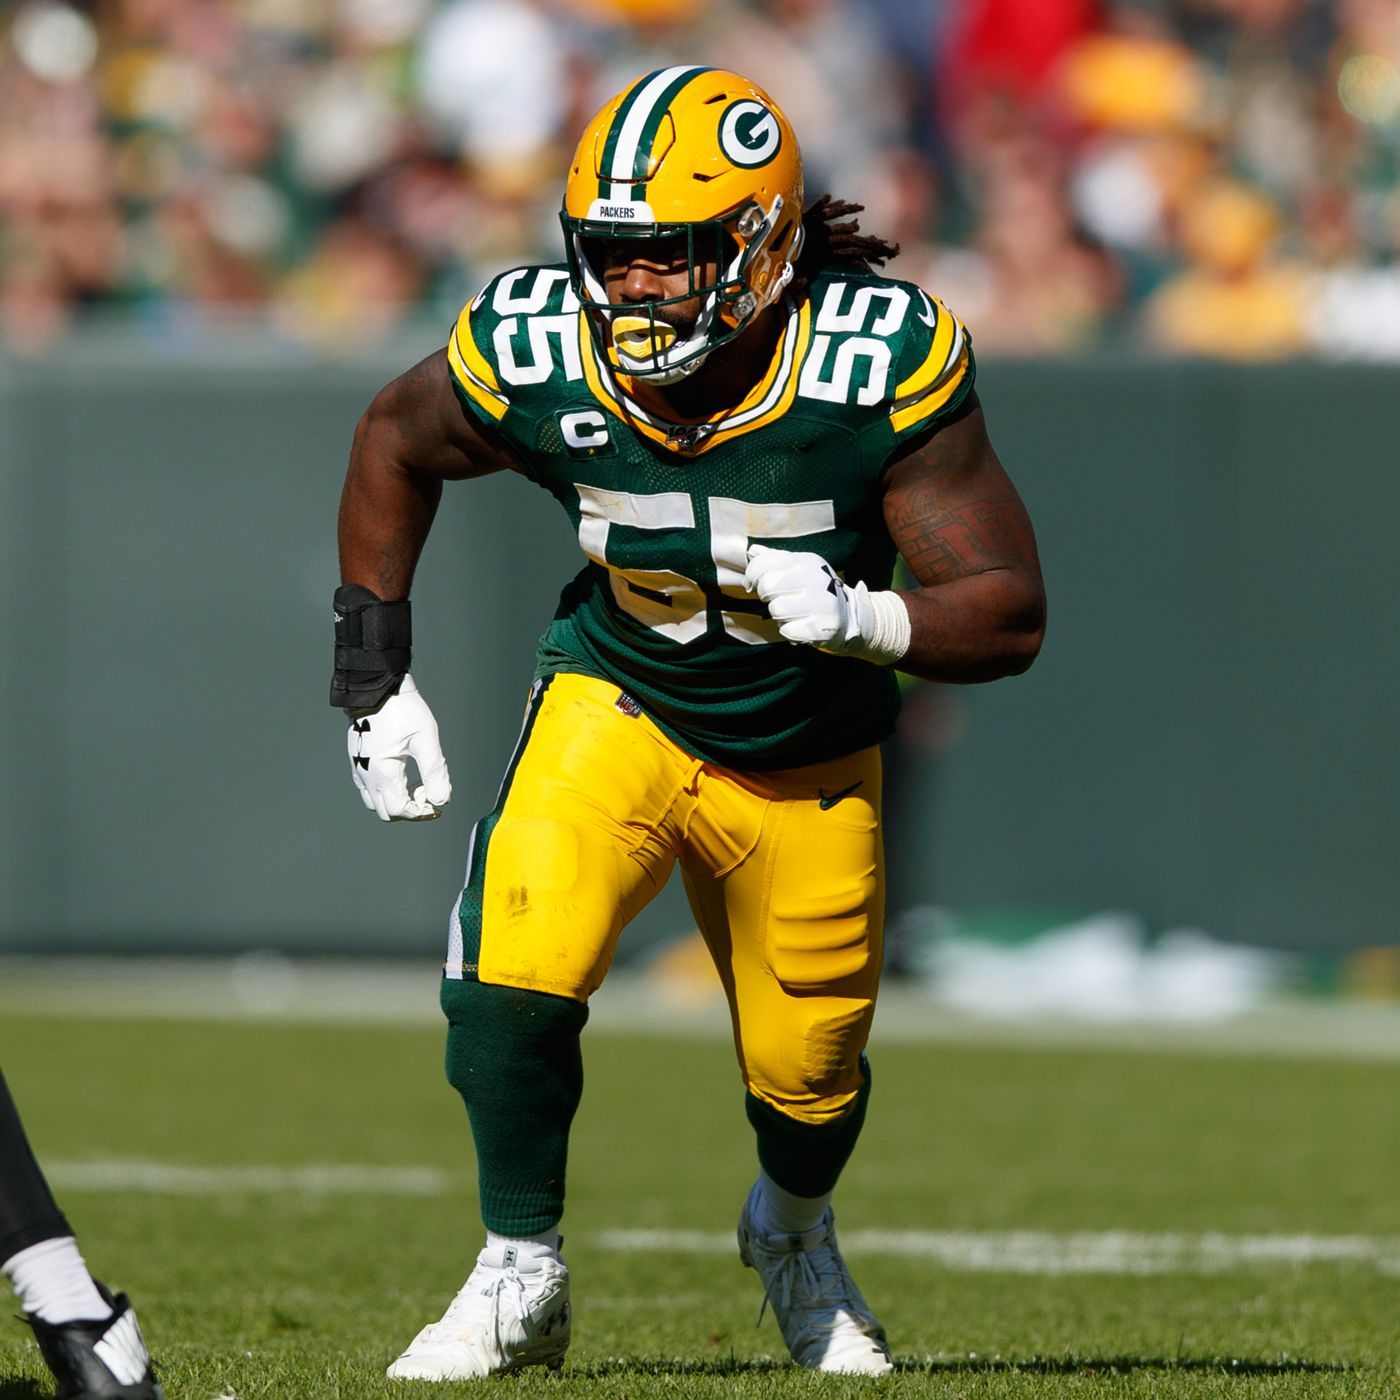 Packers OLB Za'Darius Smith ticketed for marijuana possession, per reports Packing Company